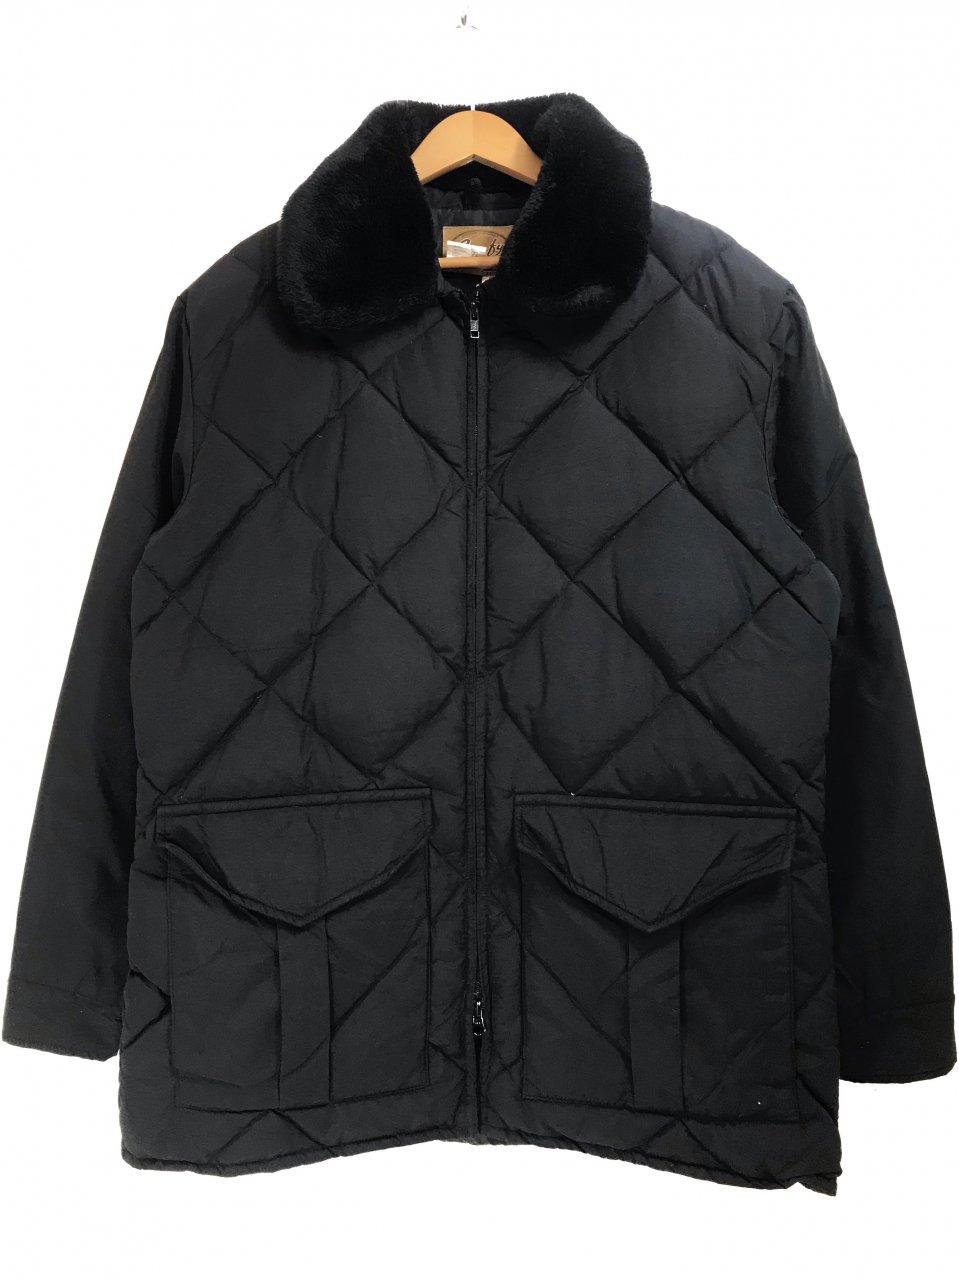 USA製 COMFY Quilting Down Jacket 黒 M コンフィー キルティング